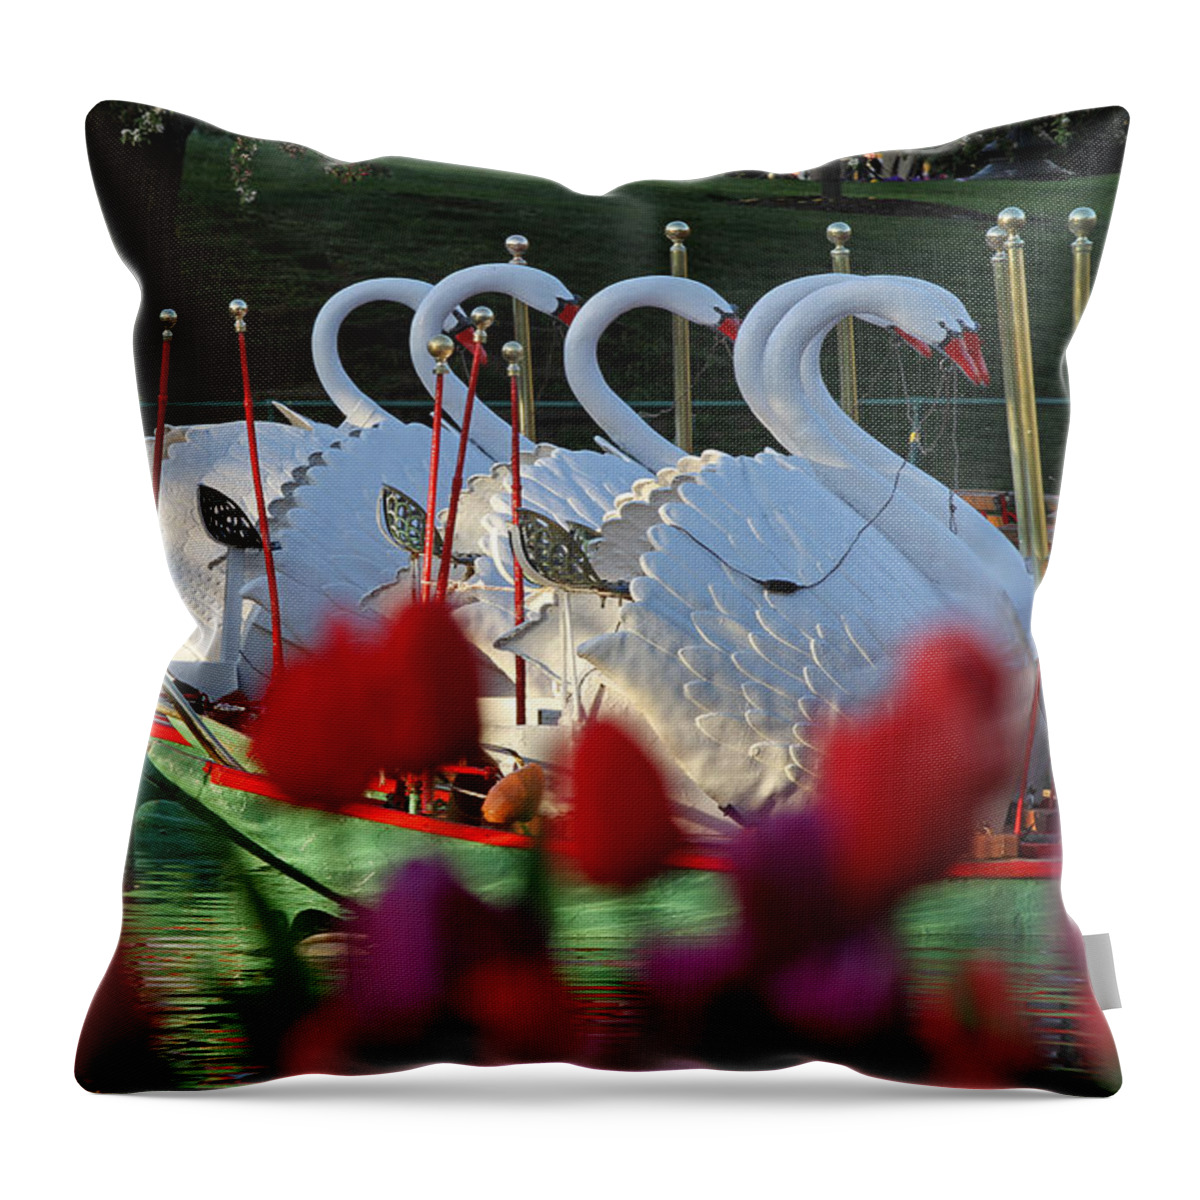 Swan Boat Throw Pillow featuring the photograph Boston Public Garden and Swan Boats by Juergen Roth